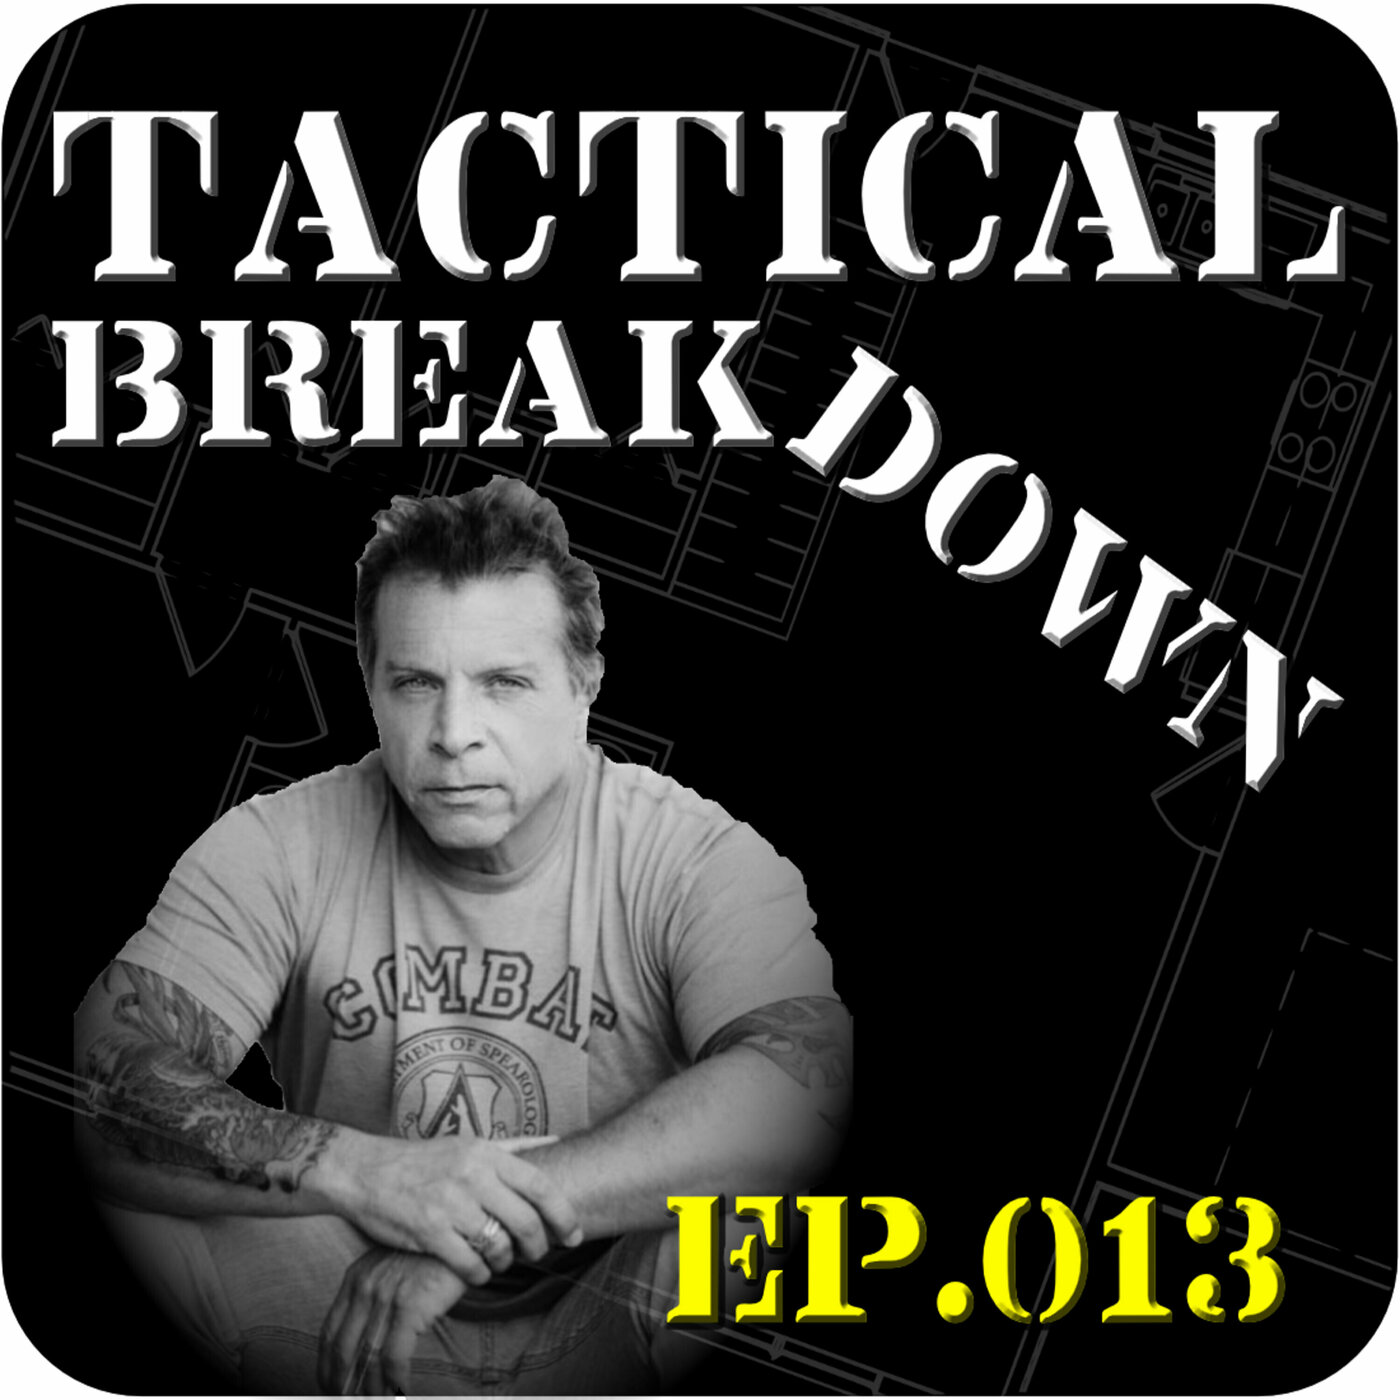 Martial Arts, Self-Awareness, and Training Smart with Tony Blauer